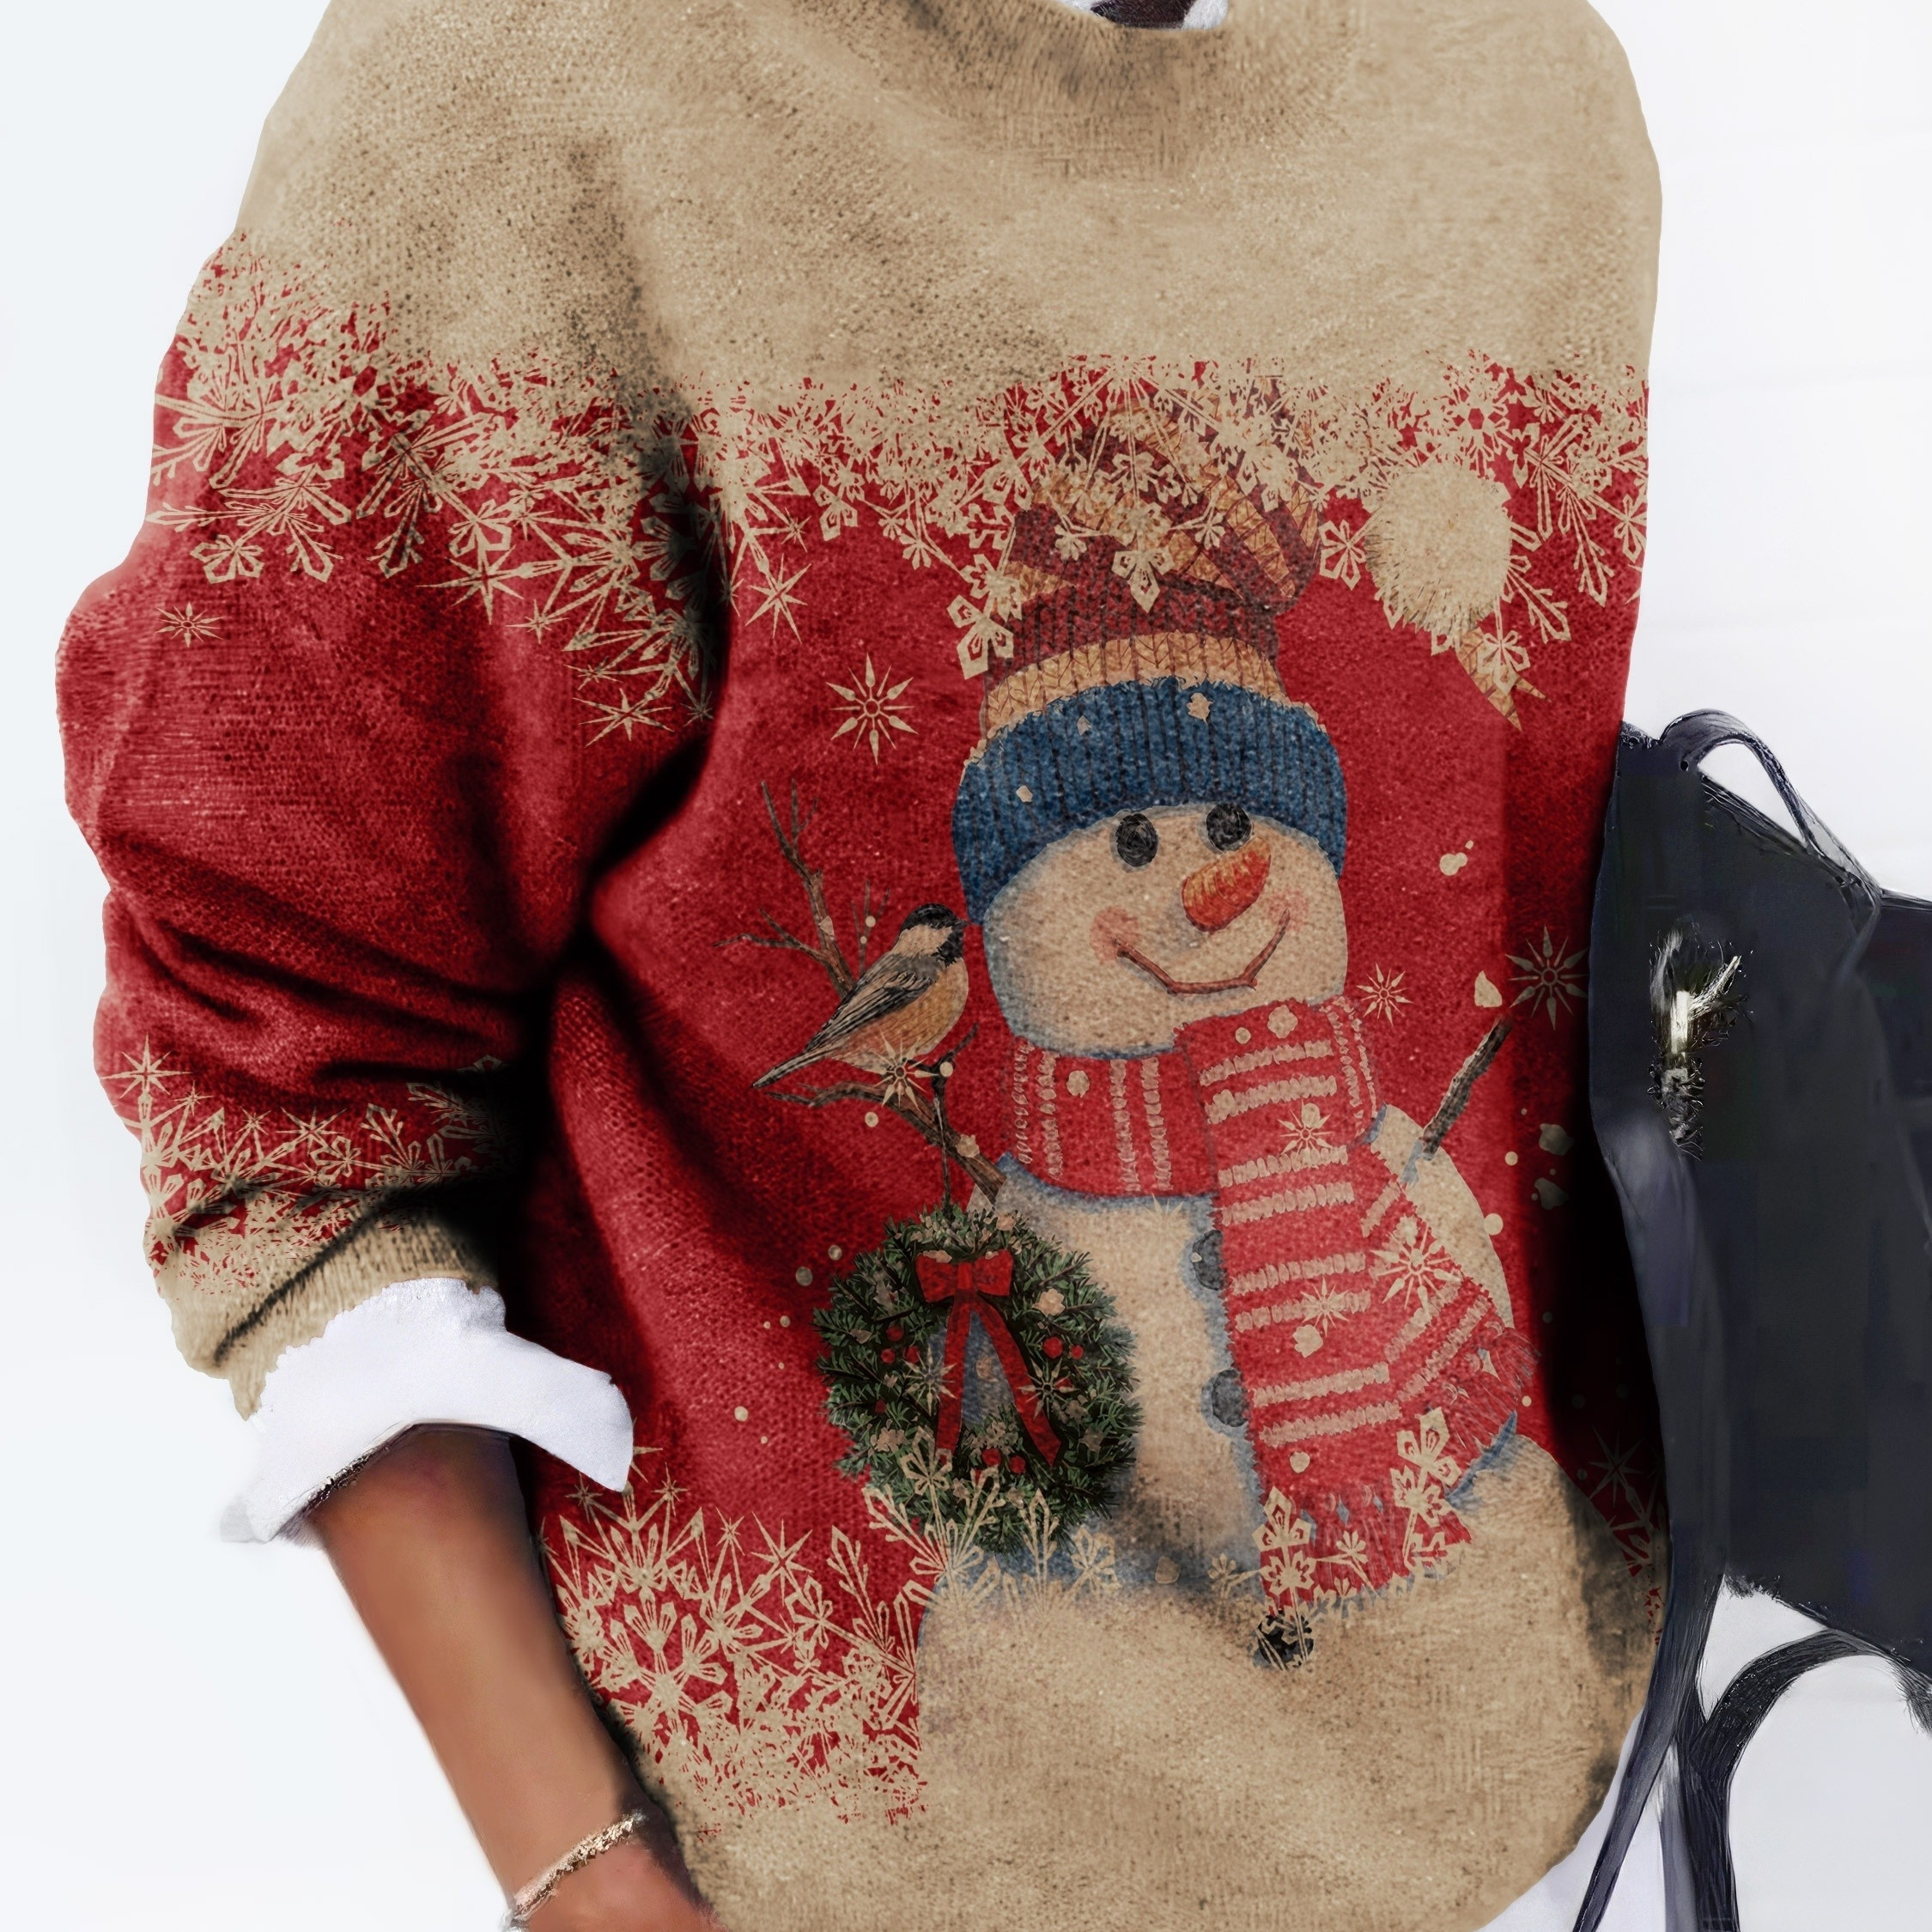 

Snowman Pattern Knit Sweater, Casual Crew Neck Long Sleeve Sweater, Women's Clothing